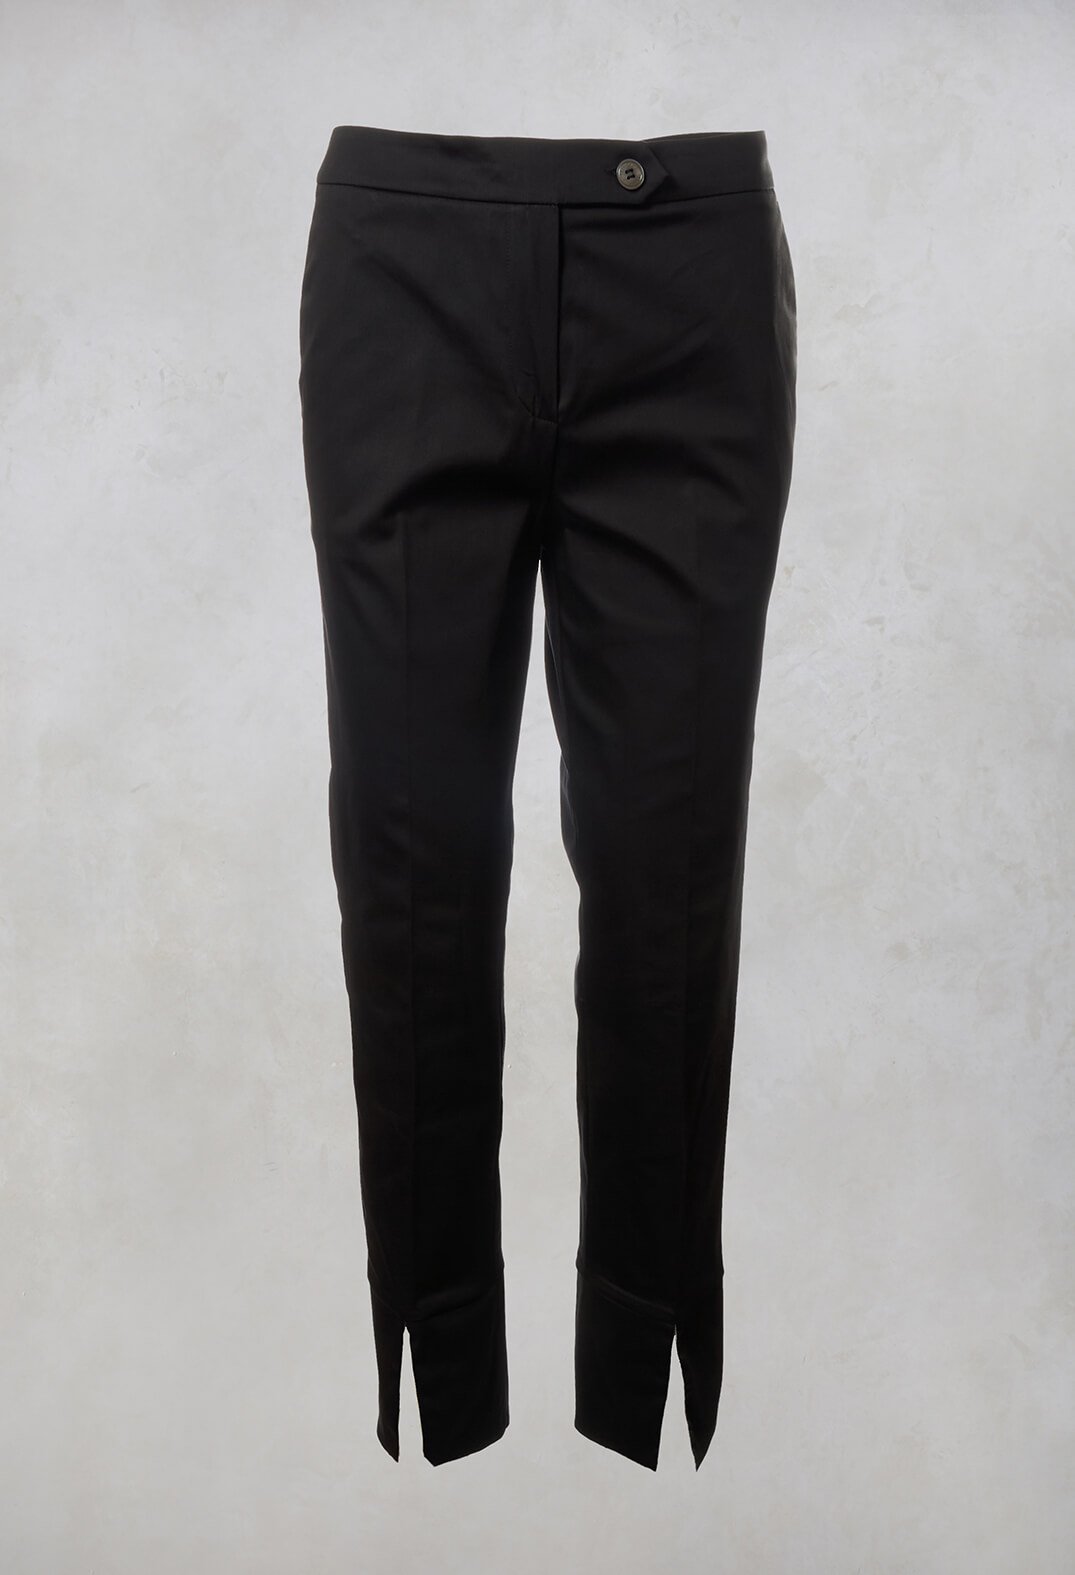 Beatrice B tailored trousers in black